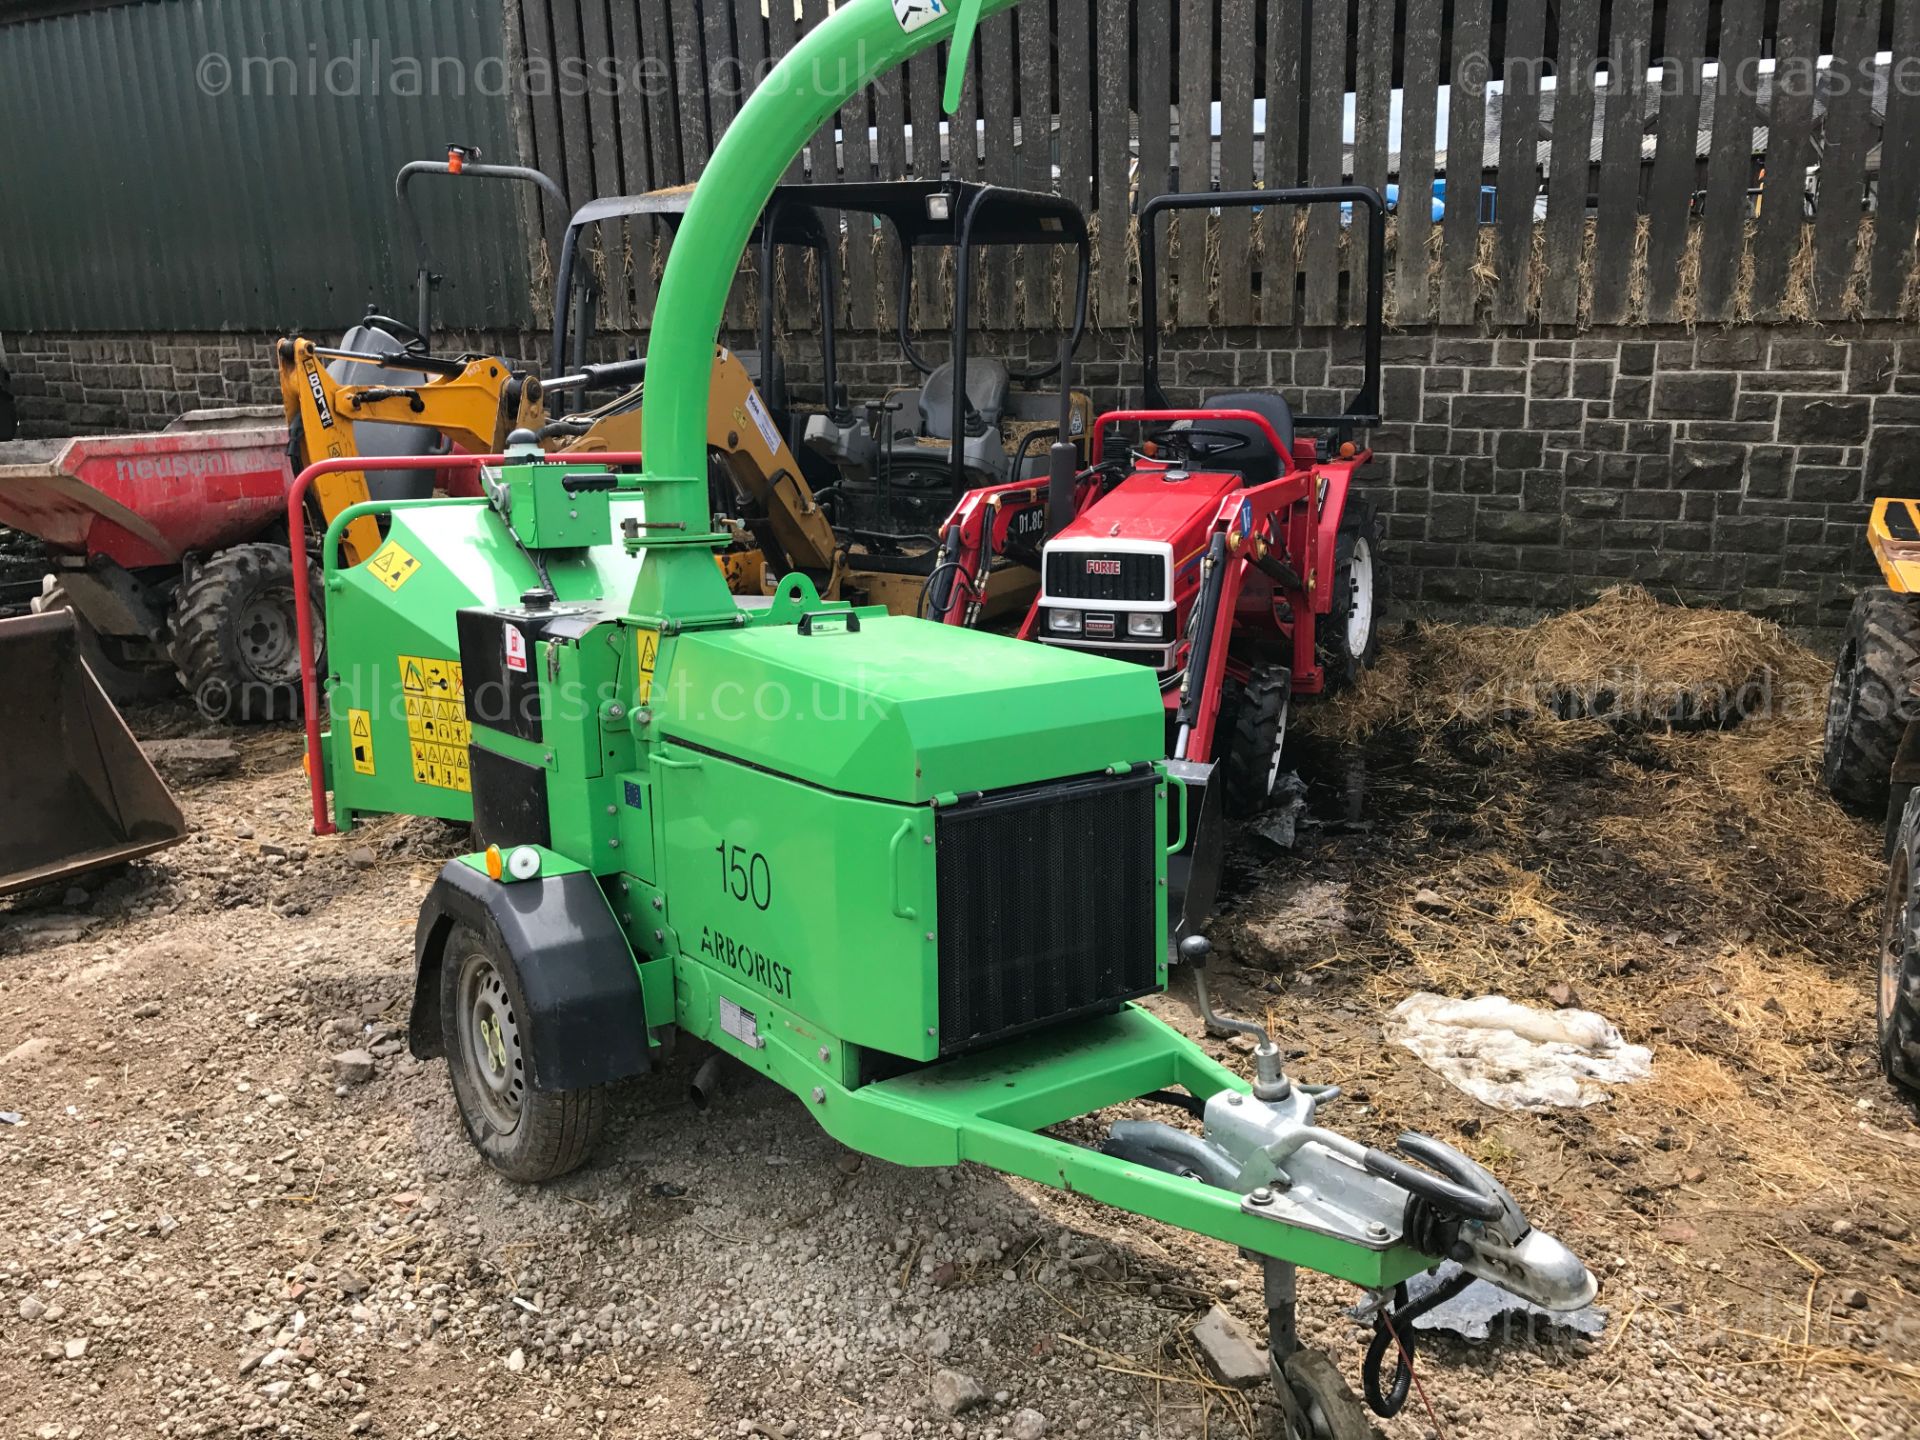 FAB CONDITION GREENMACH 150 ARBORIST WOODCHIPPER - TOWABLE - LIKE NEW CONDITION  VERY LOW HOURS - - Image 2 of 4